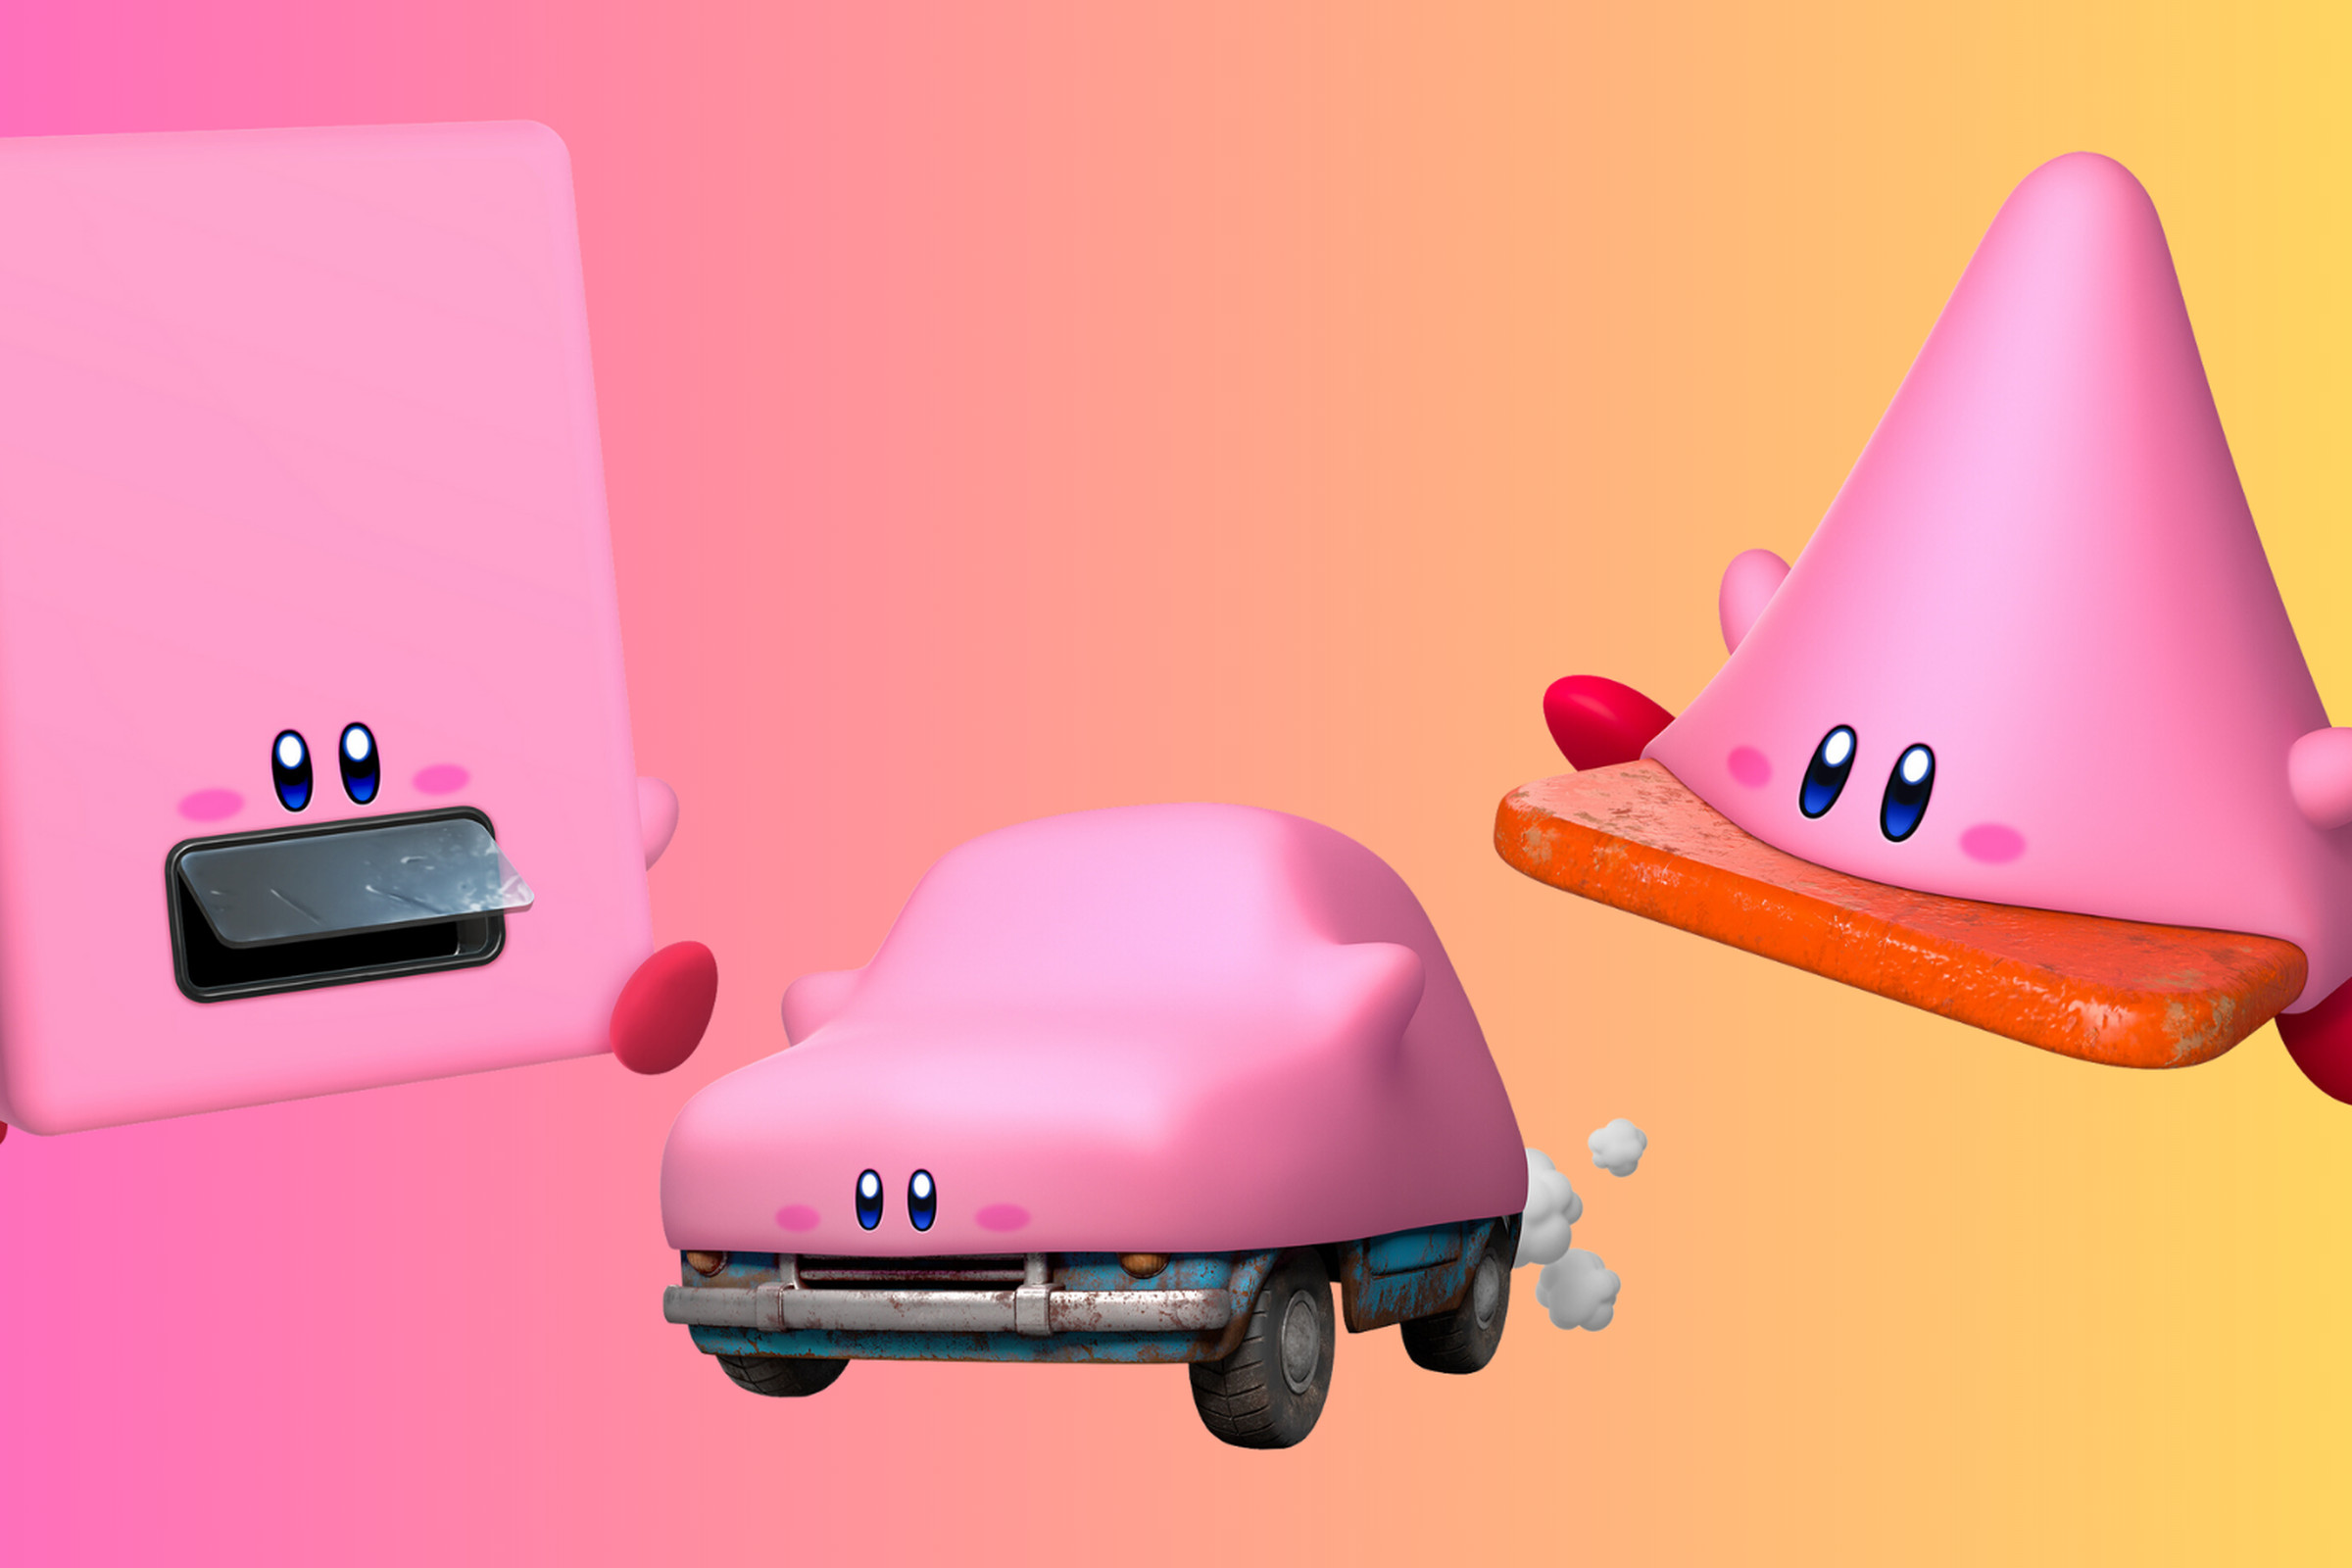 Image of Kirby in three different mouthful mode forms: vending machine, car, and traffic cone